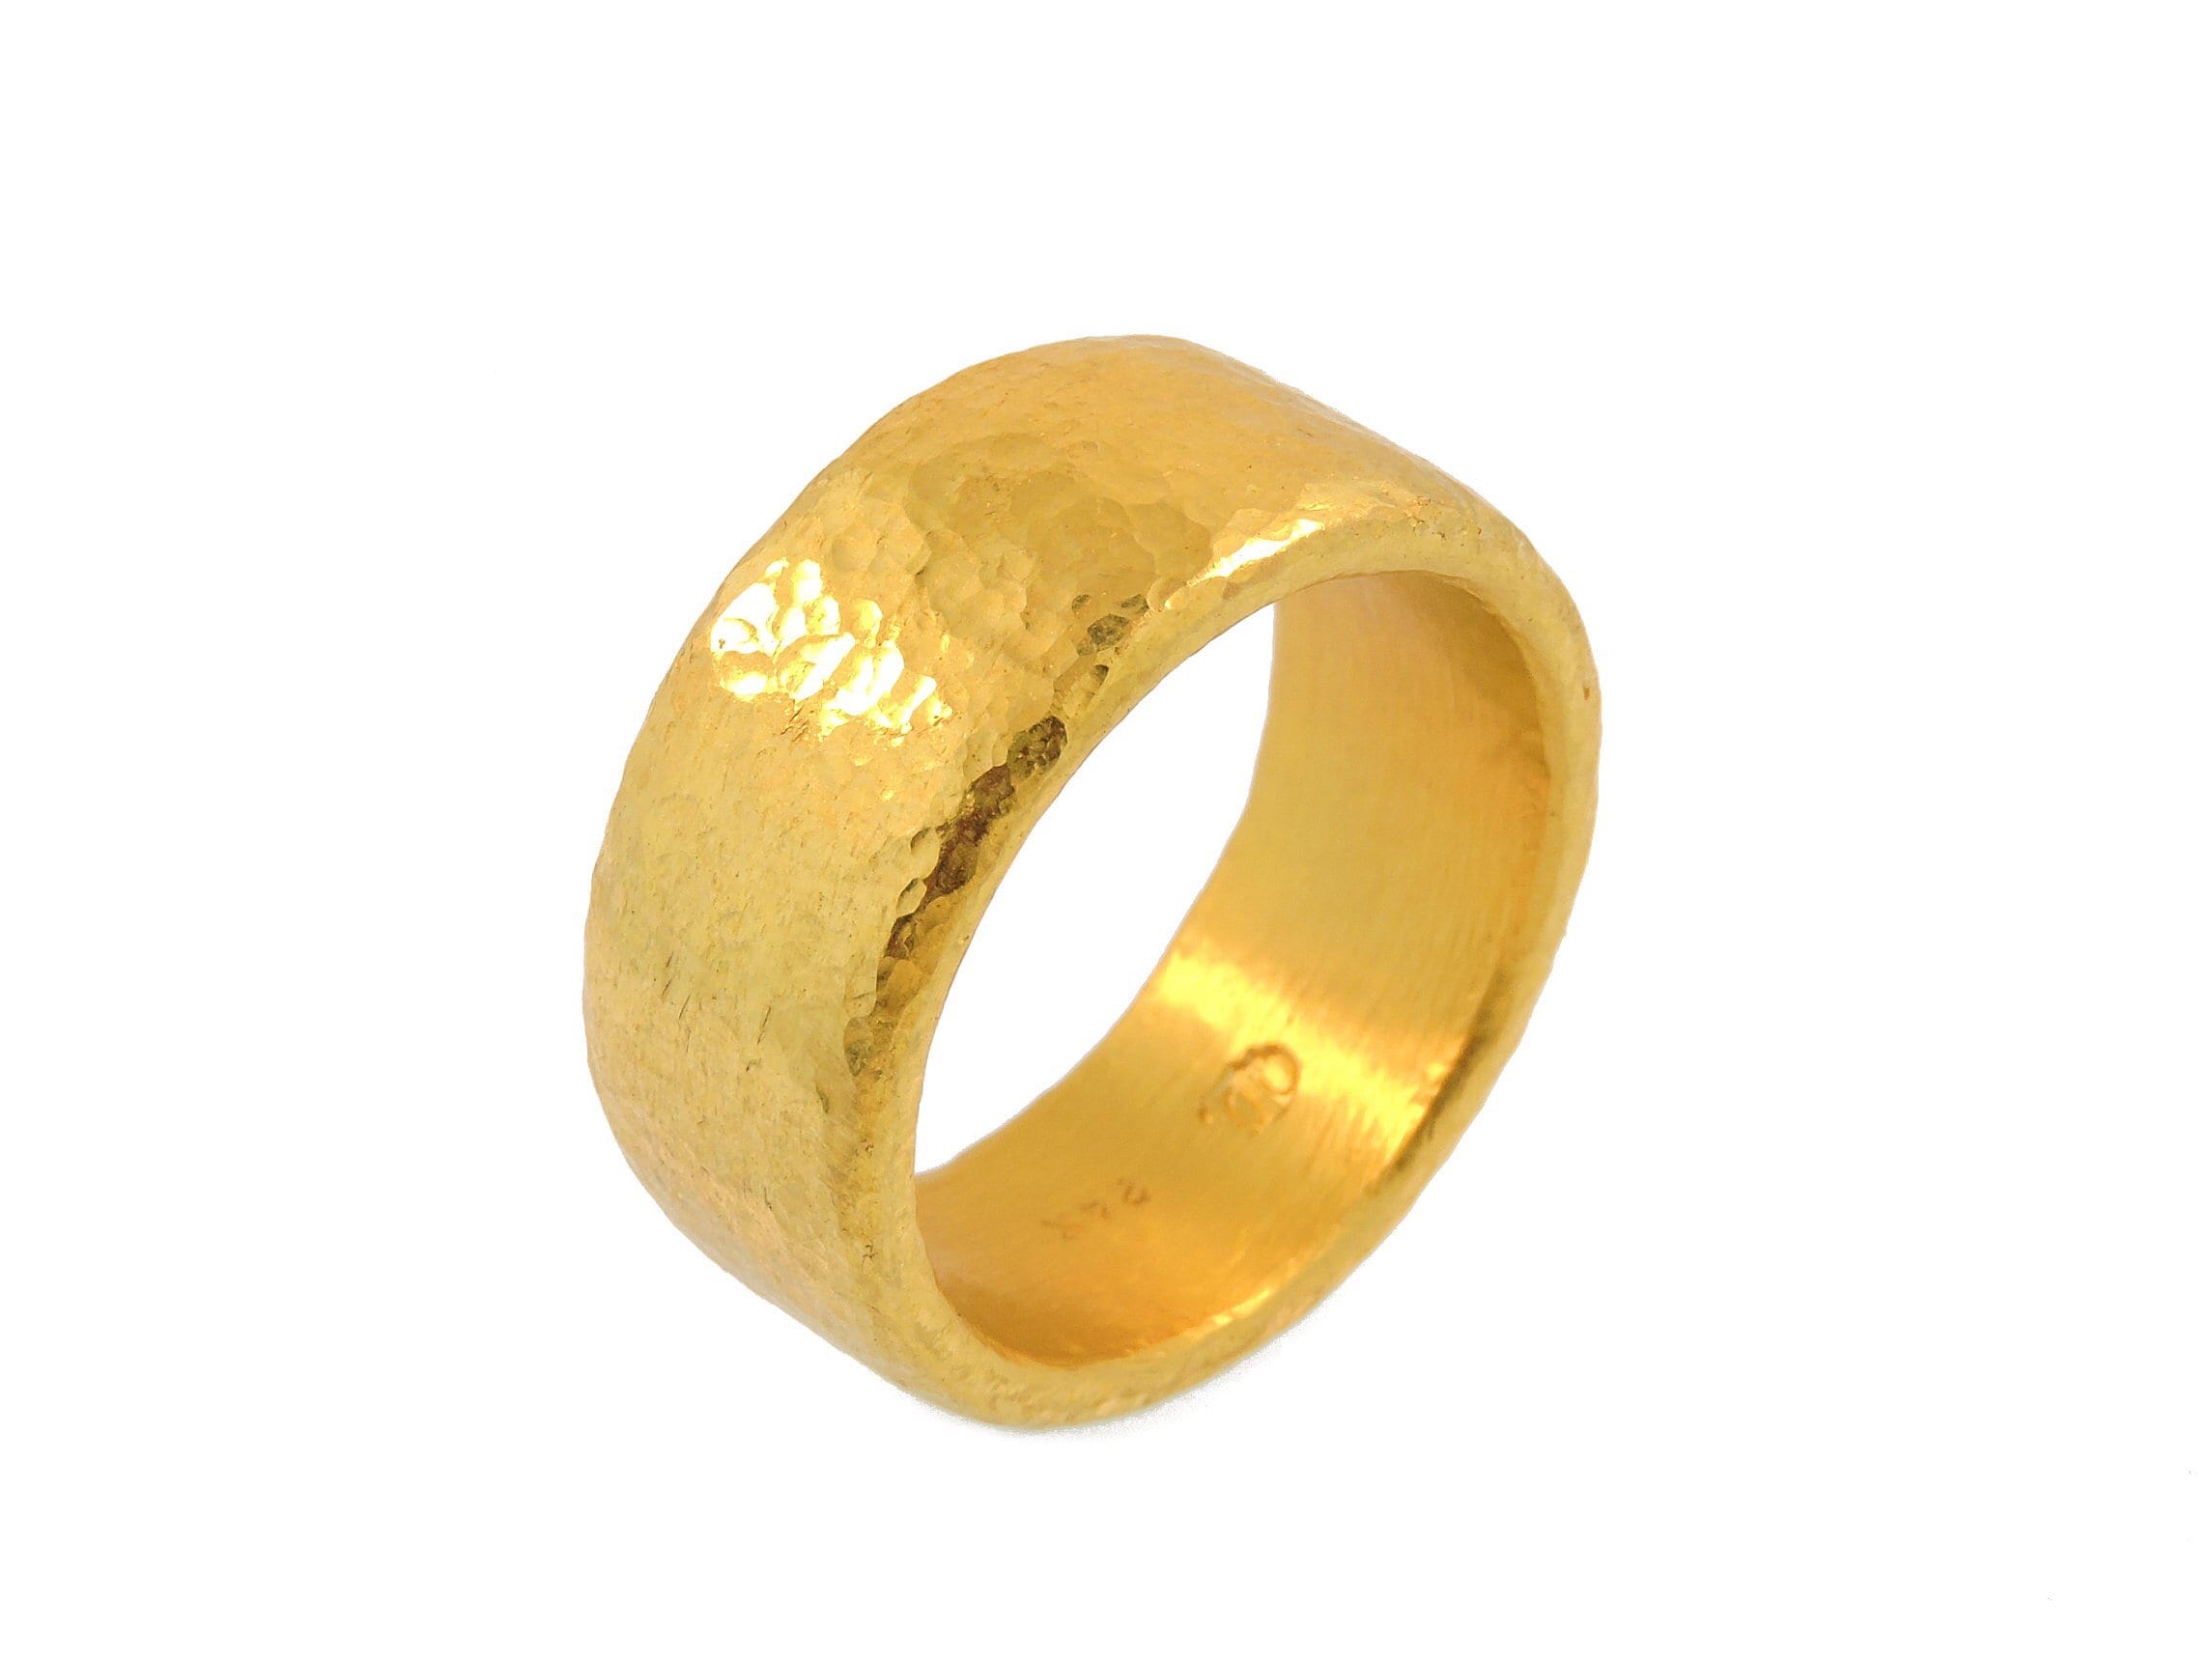 24k Solid Pure 999.9 Gold Handcraft Unisex Band rings/ Wedding Ring 11.26  grams | eBay